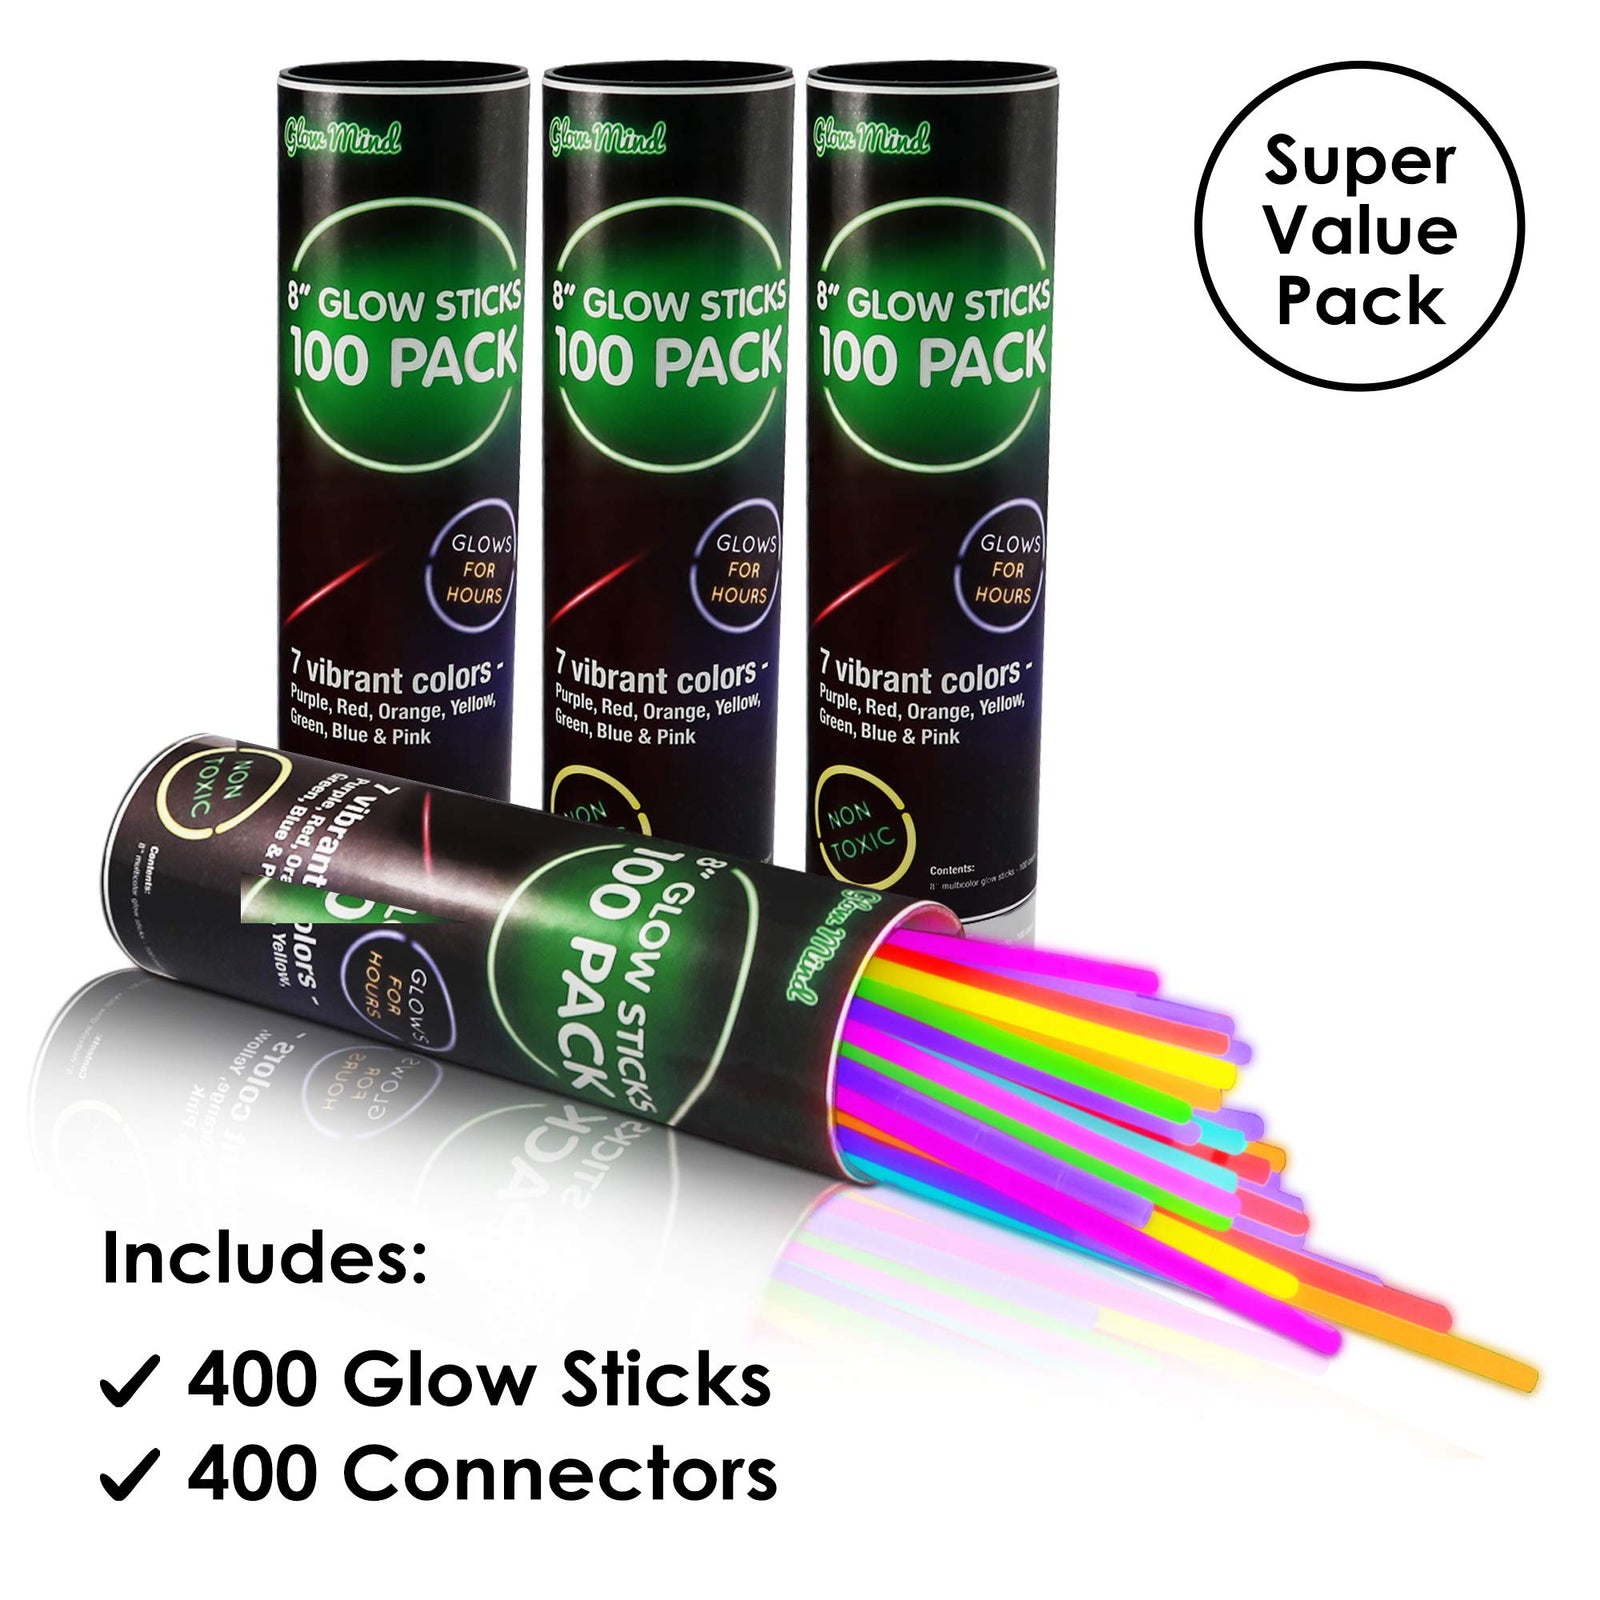 400 Glow Sticks Bulk Party Supplies - Glow in The Dark Fun Party Favors Pack with 8" Glowsticks and Connectors for Bracelets and Necklaces for Kids and Adults